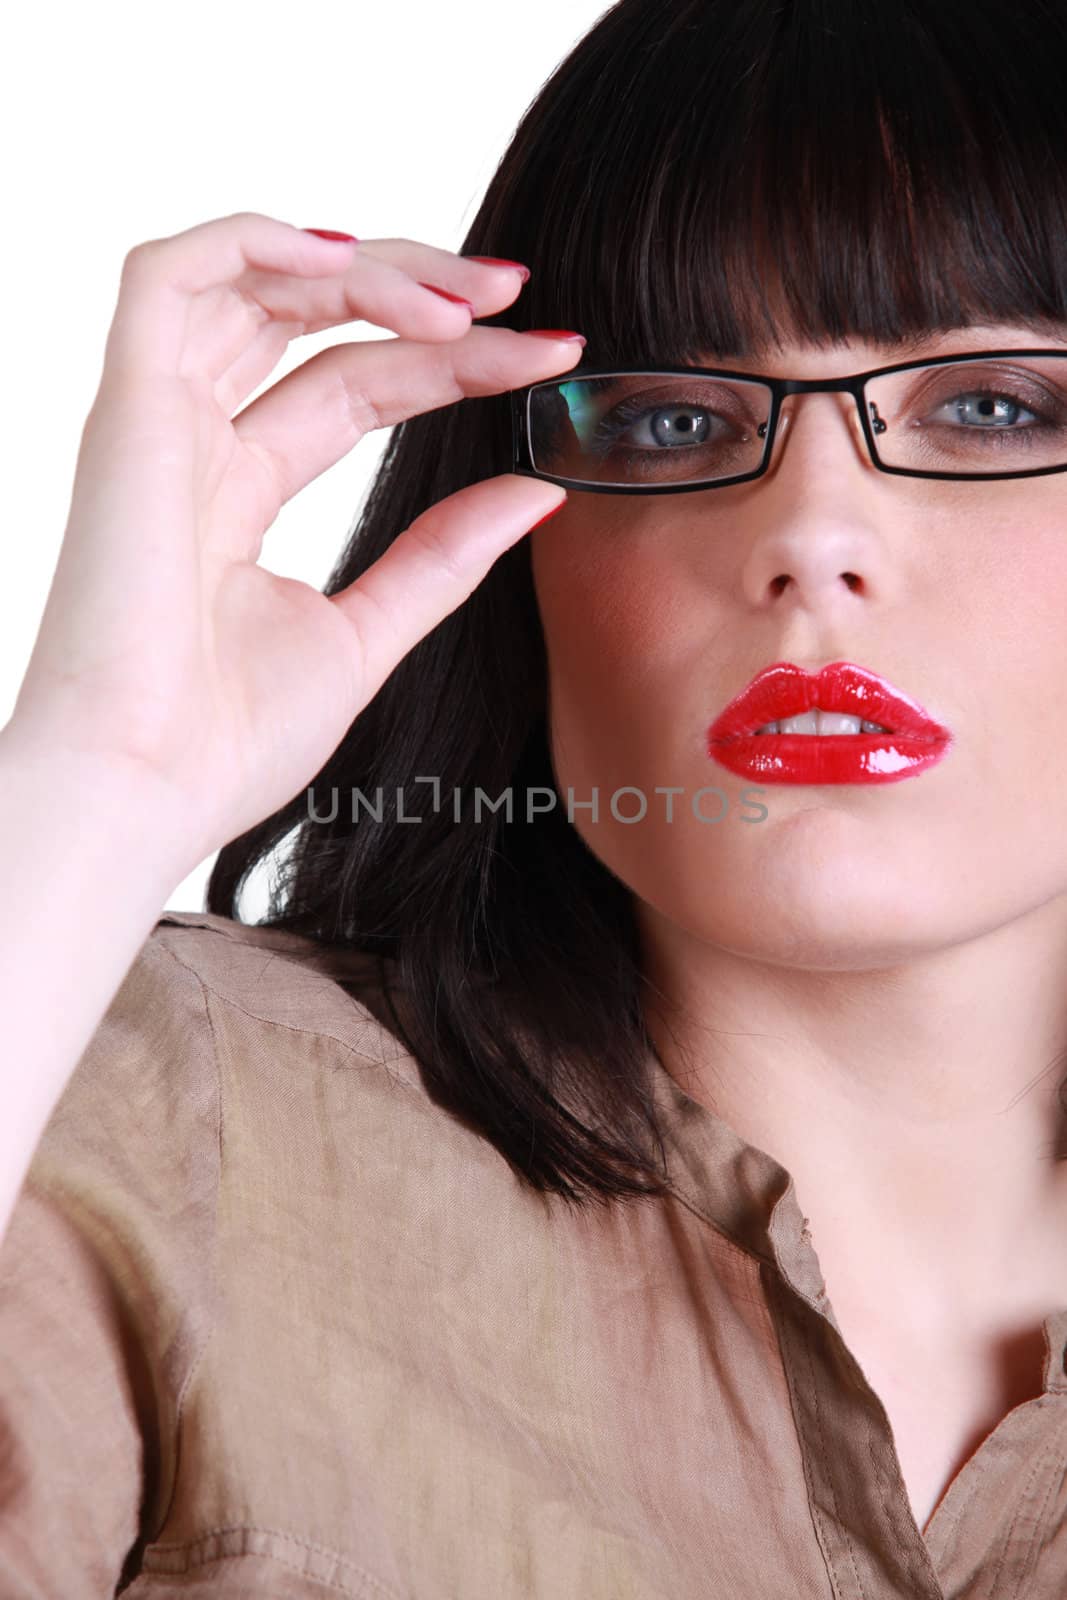 Stunning woman wearing glasses by phovoir